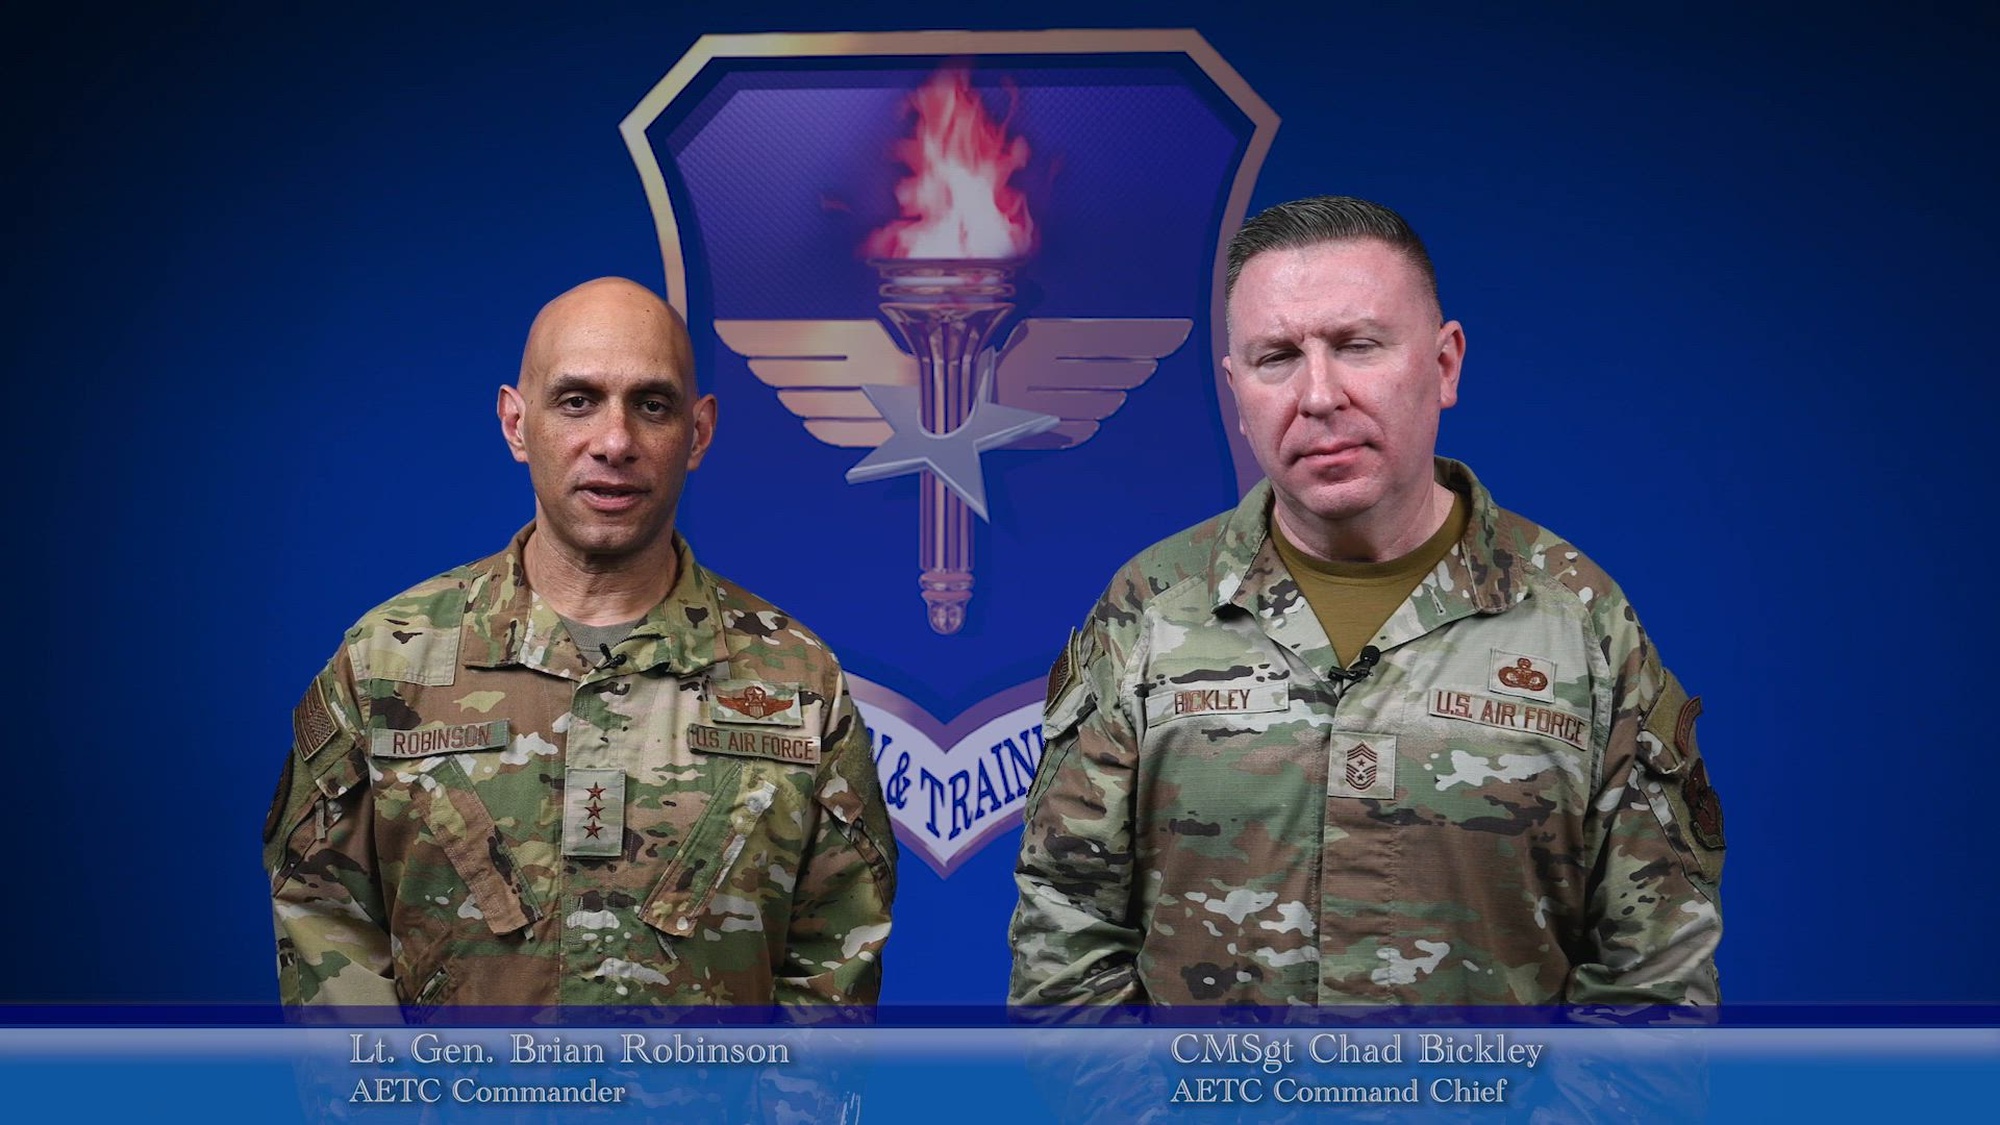 Lt. Gen. Brian S. Robinson, commander of Air Education and Training Command and Chief Master Sgt. Chad Bickley, AETC command chief, discuss the change from AETC to Airman Development Command and how the command is at the forefront of the Air Force’s readiness and most significant organizational change in just over three decades. (U.S. Air Force video by Andriy Agashchuk)